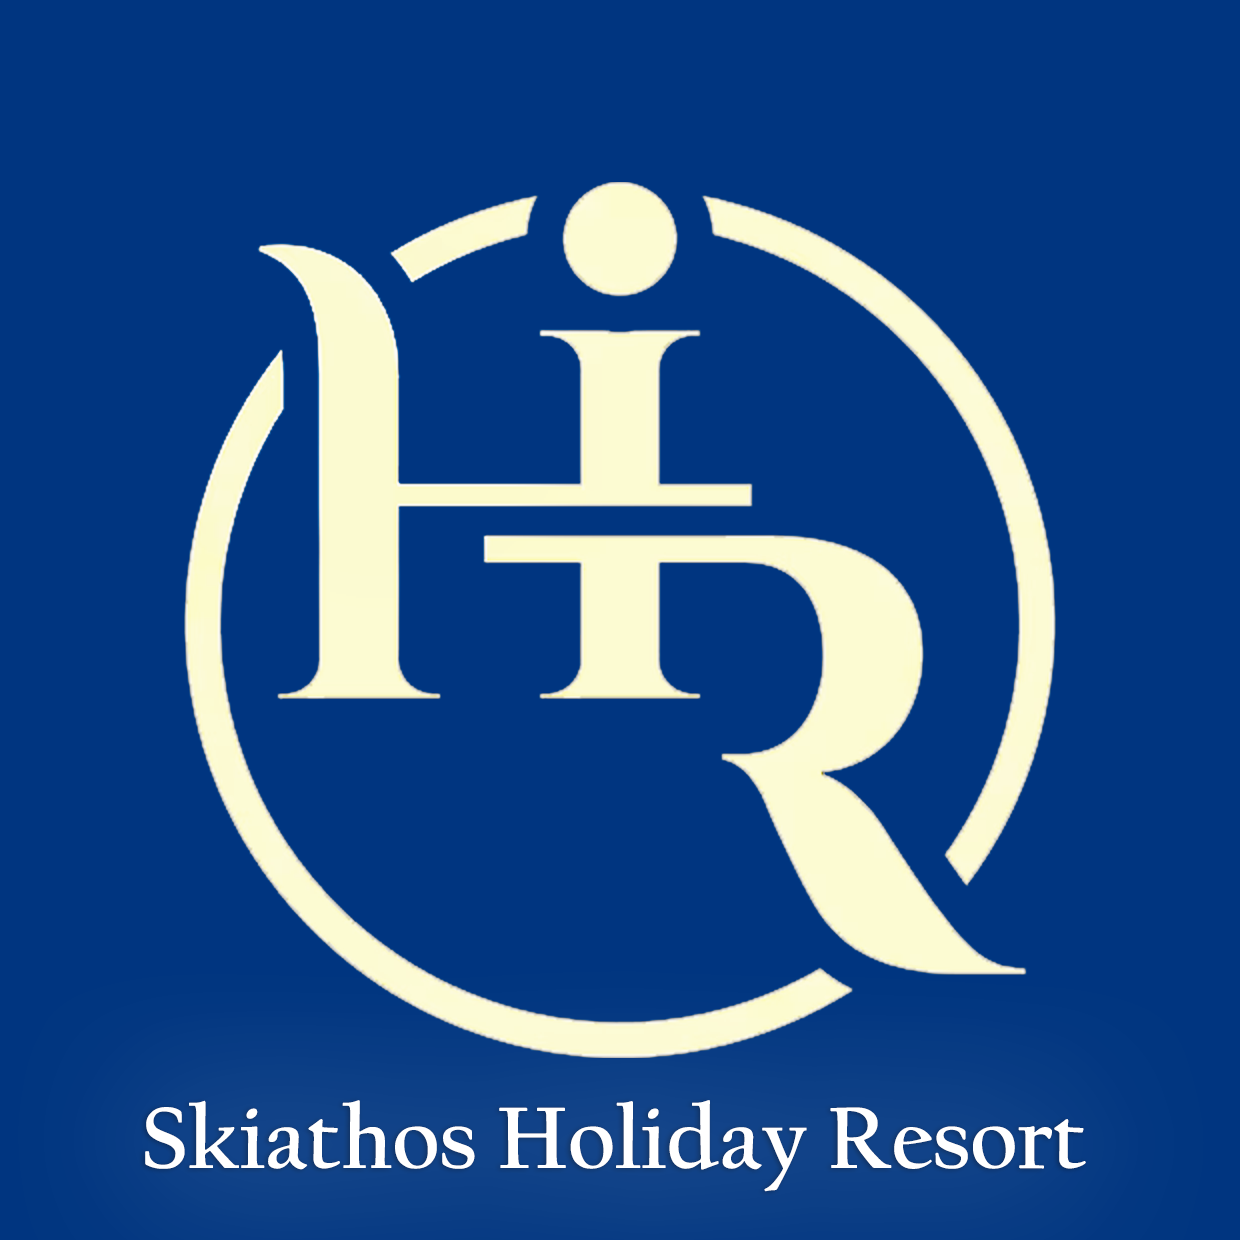 Skiathos Holiday Resort | Check In – Check Out - Skiathos Holiday Resort